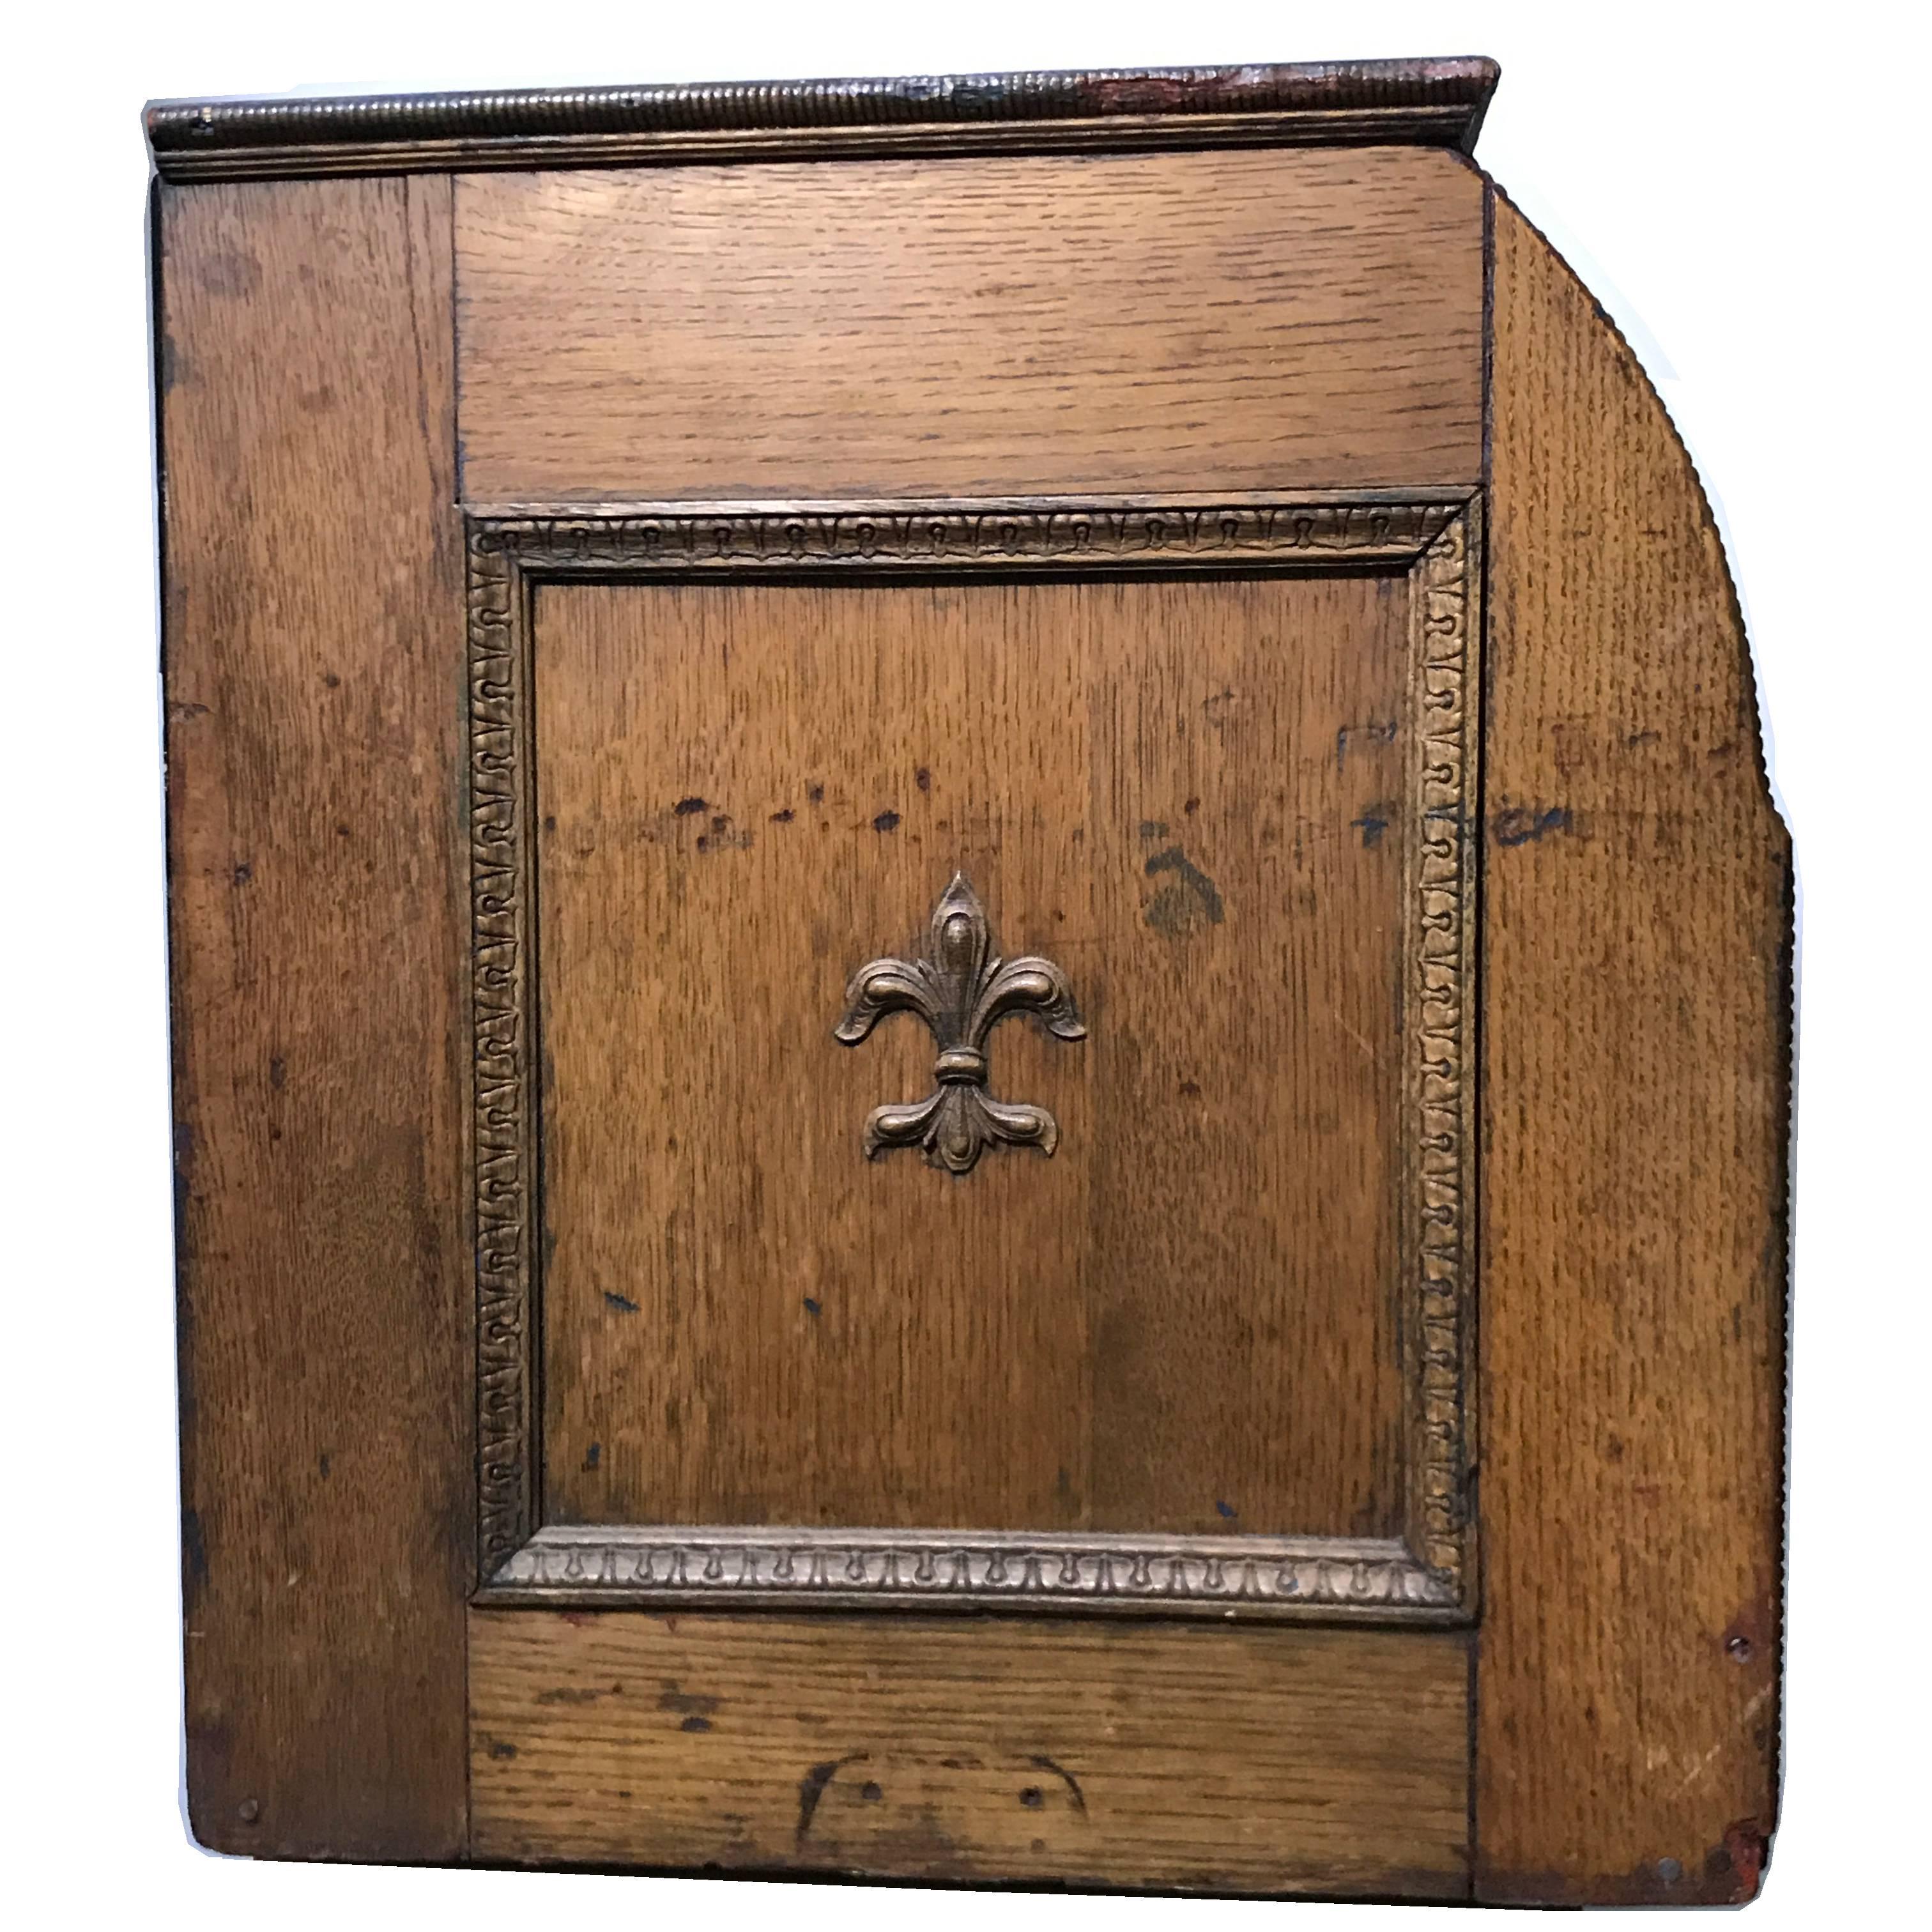 So much fun an arcade machine gift for those who have everything!
Antique circa 1890s Art Nouveau period mills 'The Quartoscope' Stereoviewer Penny arcade machine, a rare coin op in original unrestored wood case, good working condition. A very